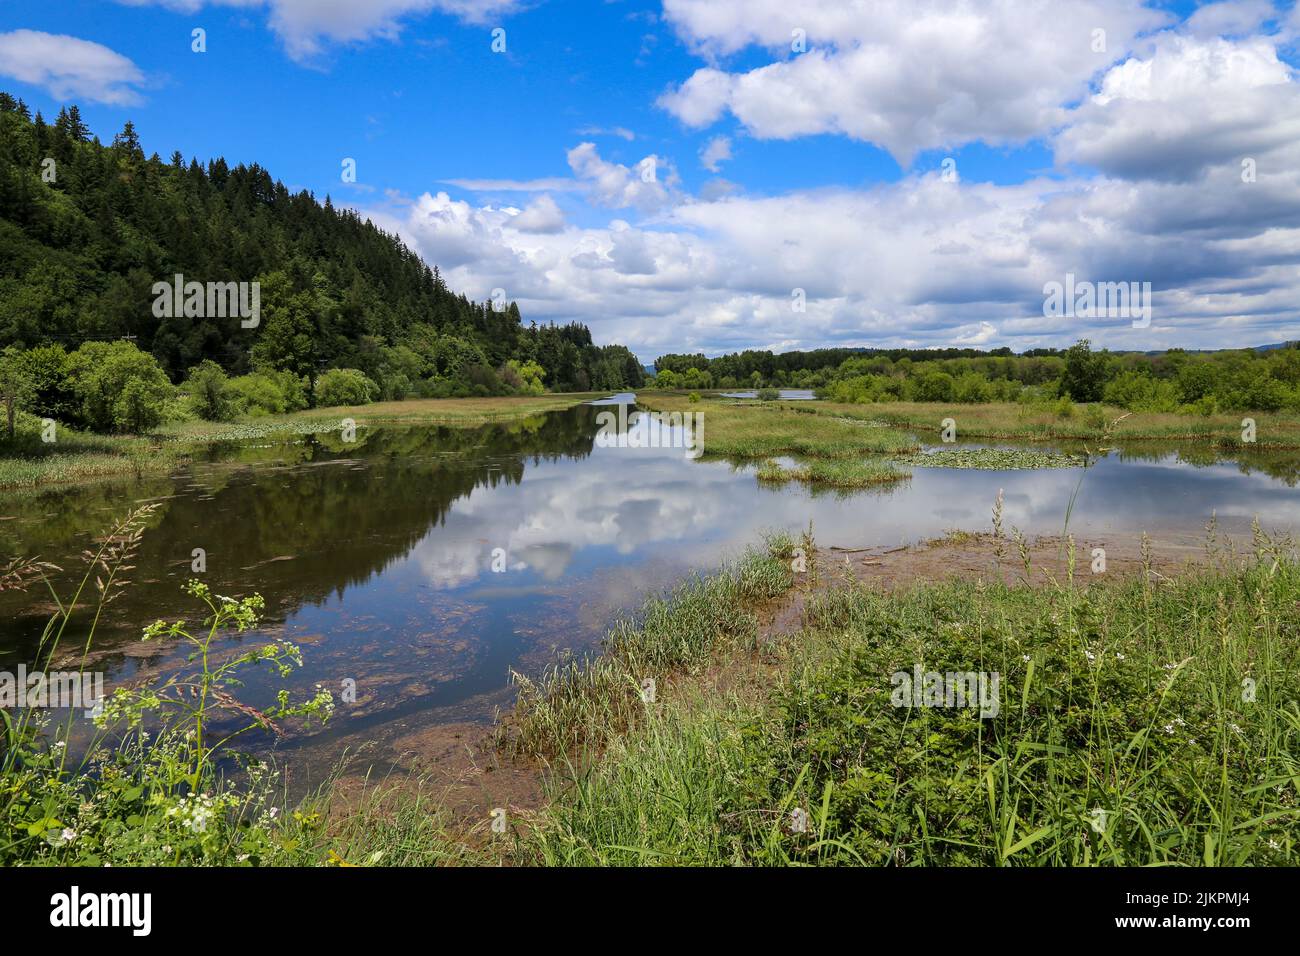 A peaceful scene with a calm river by green wood on a summer day Stock Photo